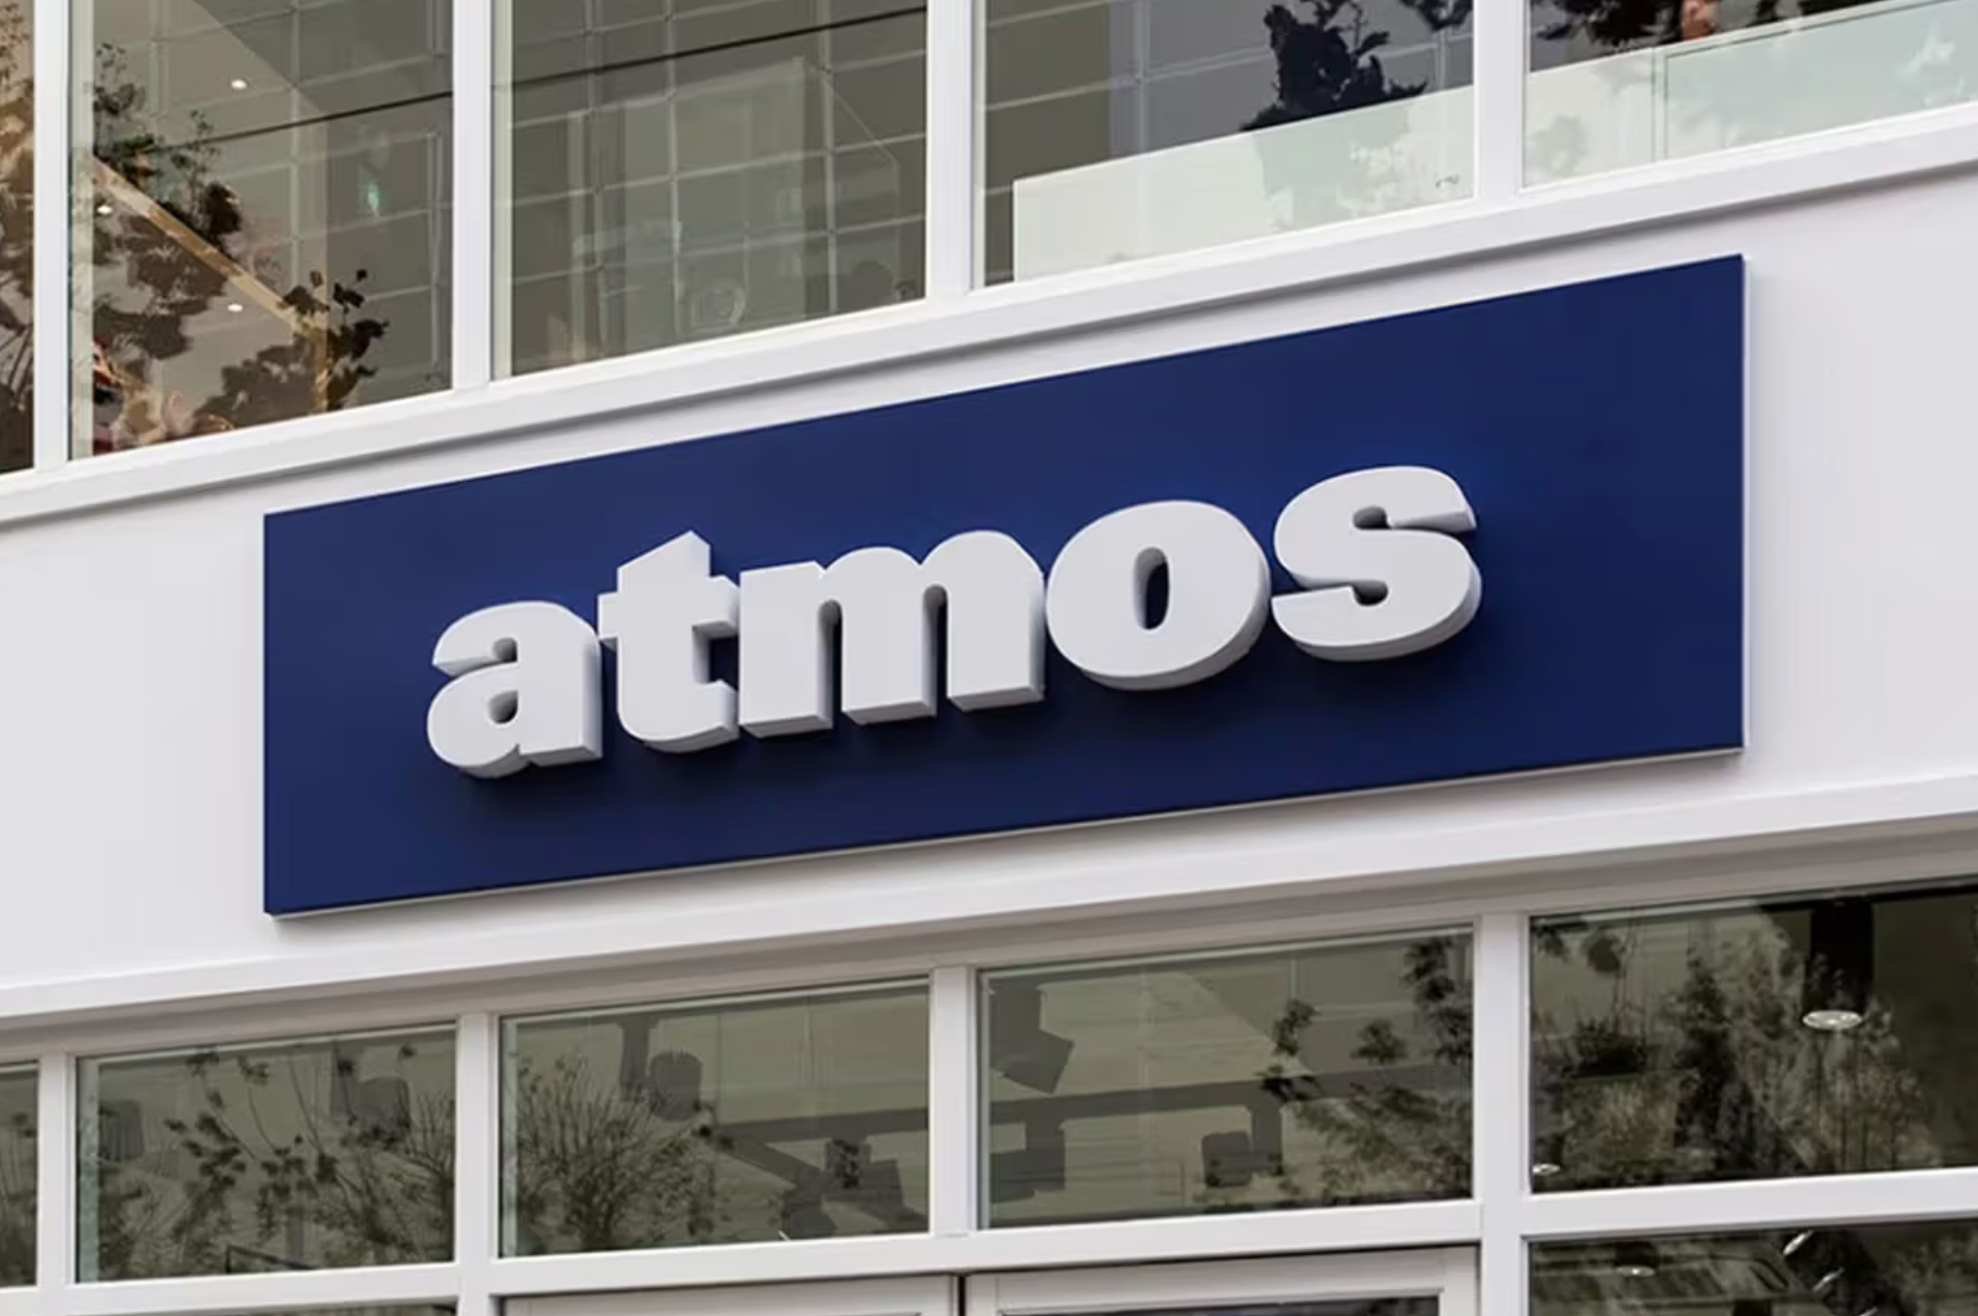  atmos To Close All of Its North American Stores The Foot Locker-owned retailer will also shut down its website in the U.S.